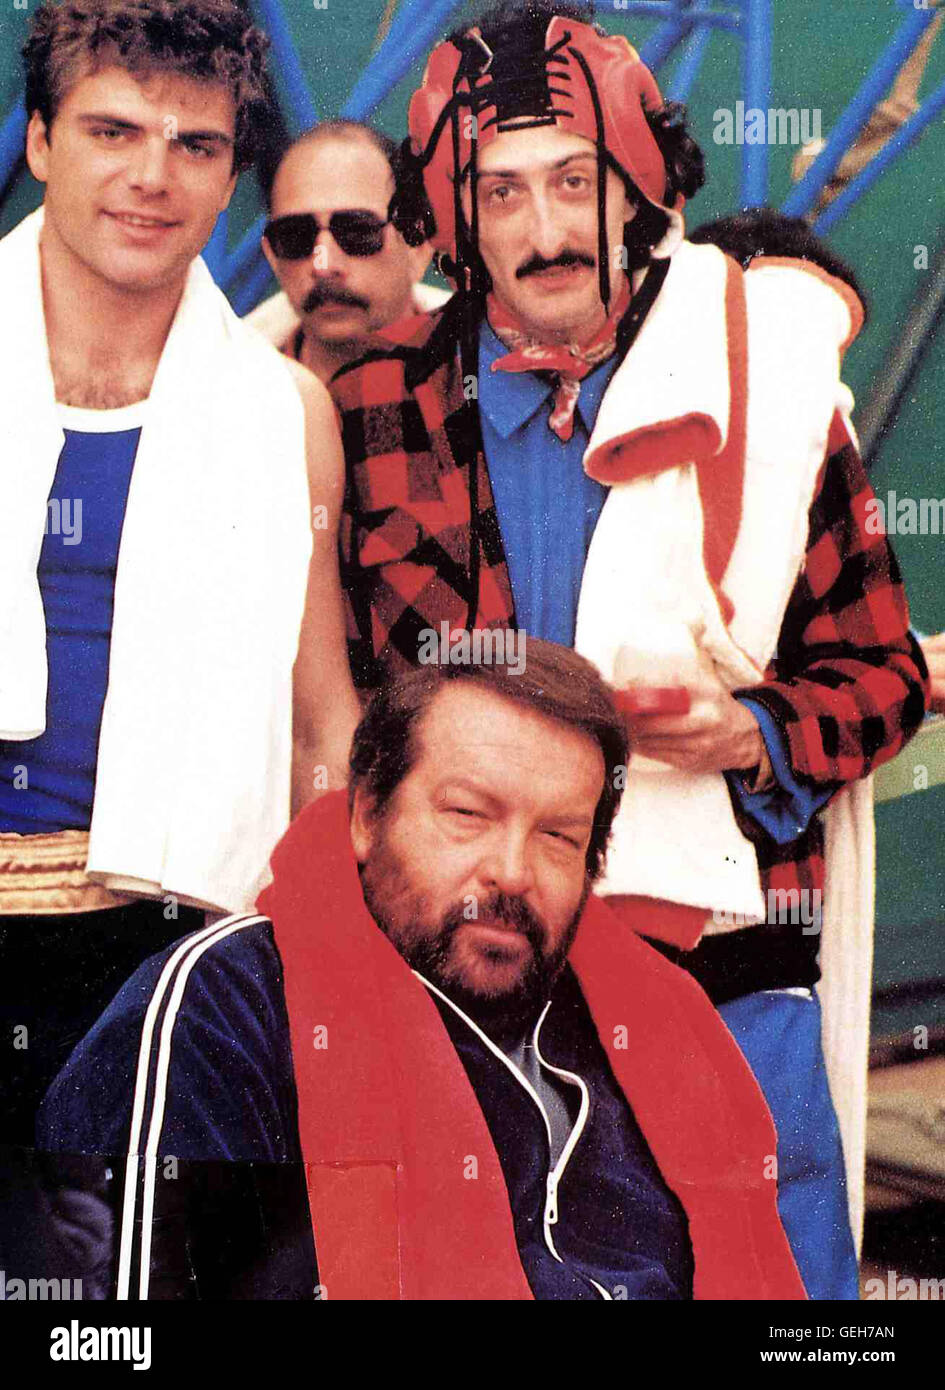 Der Bud Spencer Bud Spencer High Resolution Stock Photography and Images -  Alamy